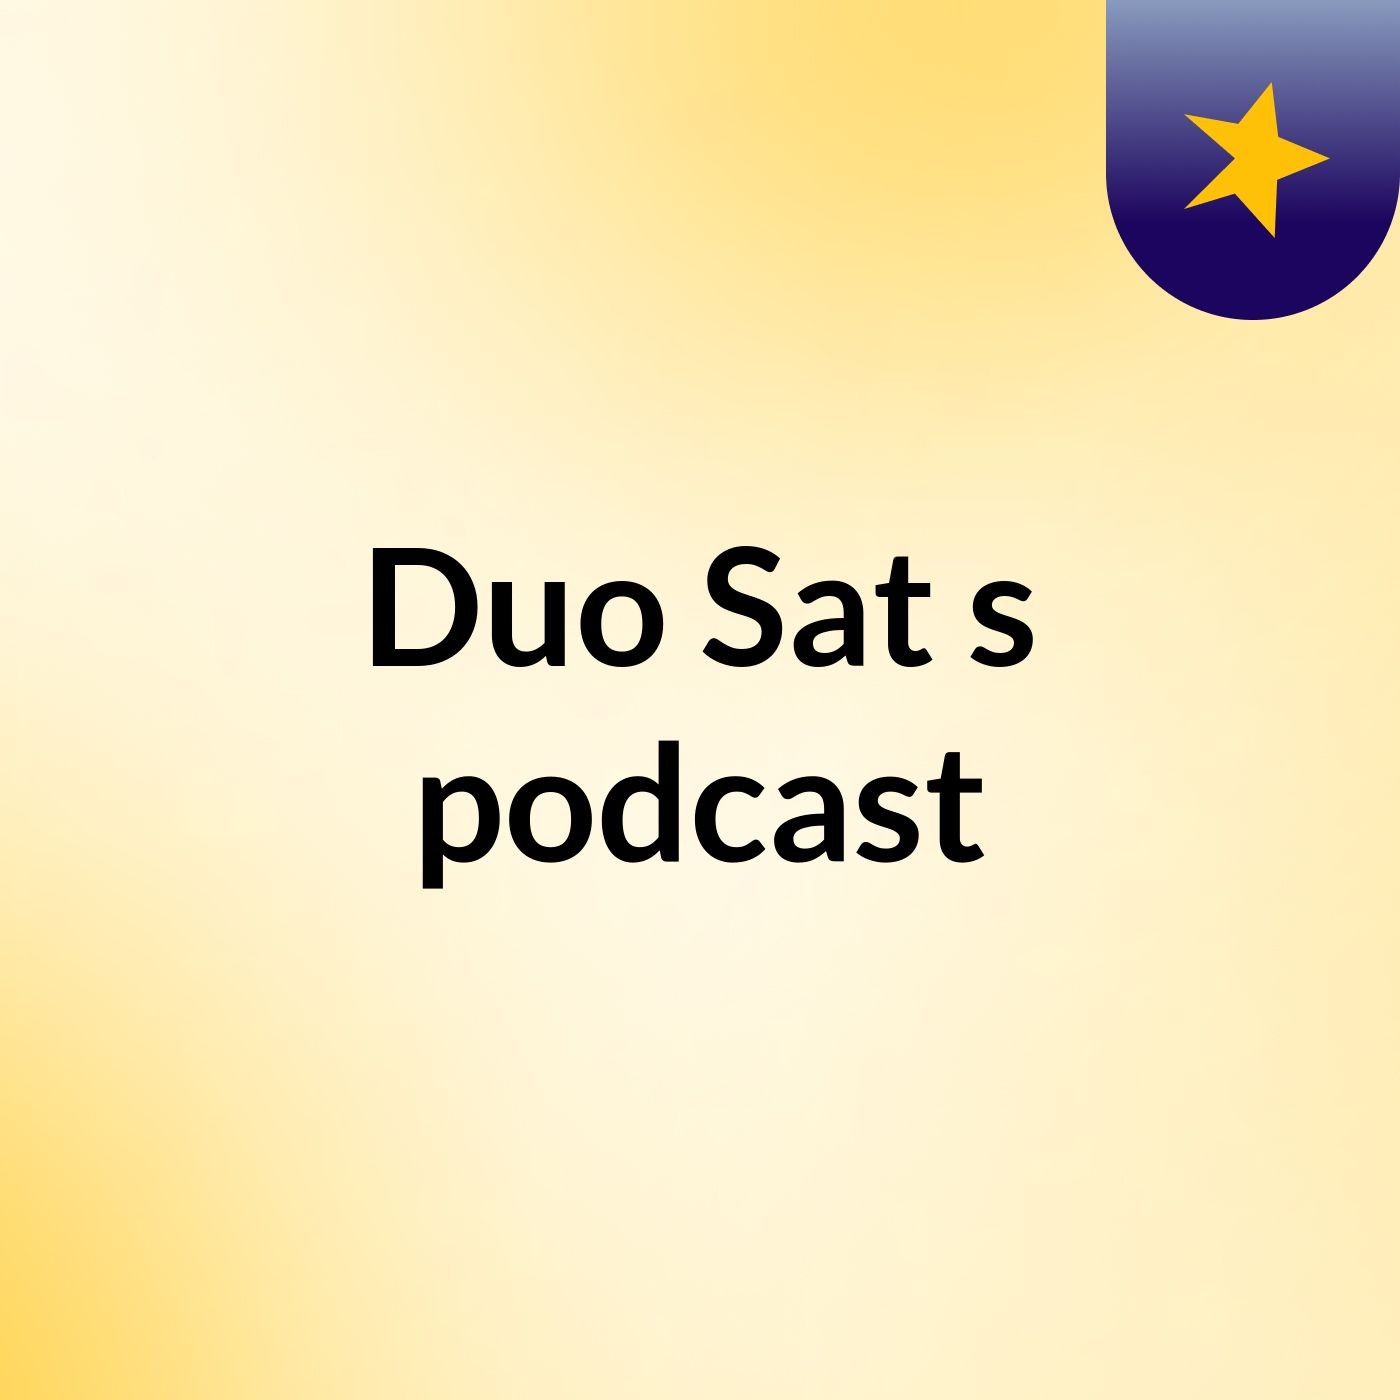 Duo Sat's podcast